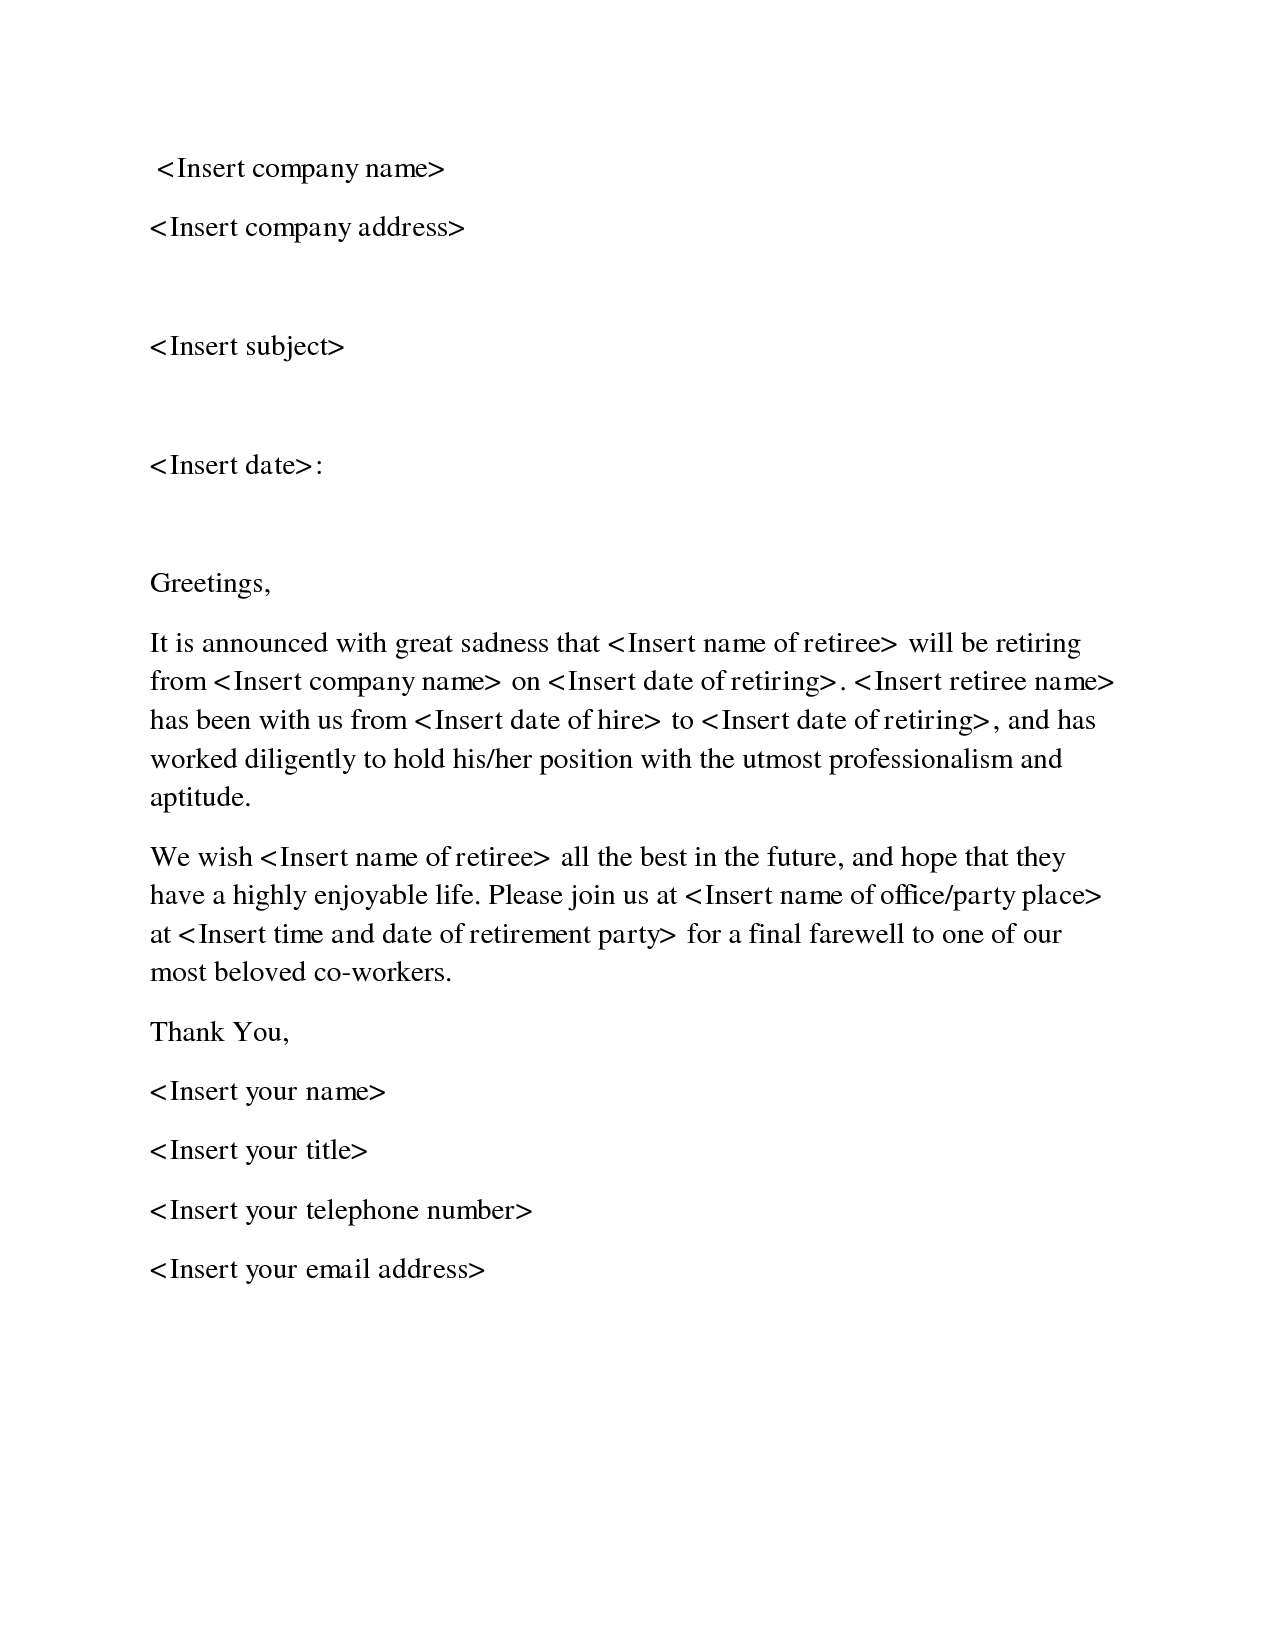 Sample goodbye emails colleagues farewell letter co workers doc by 